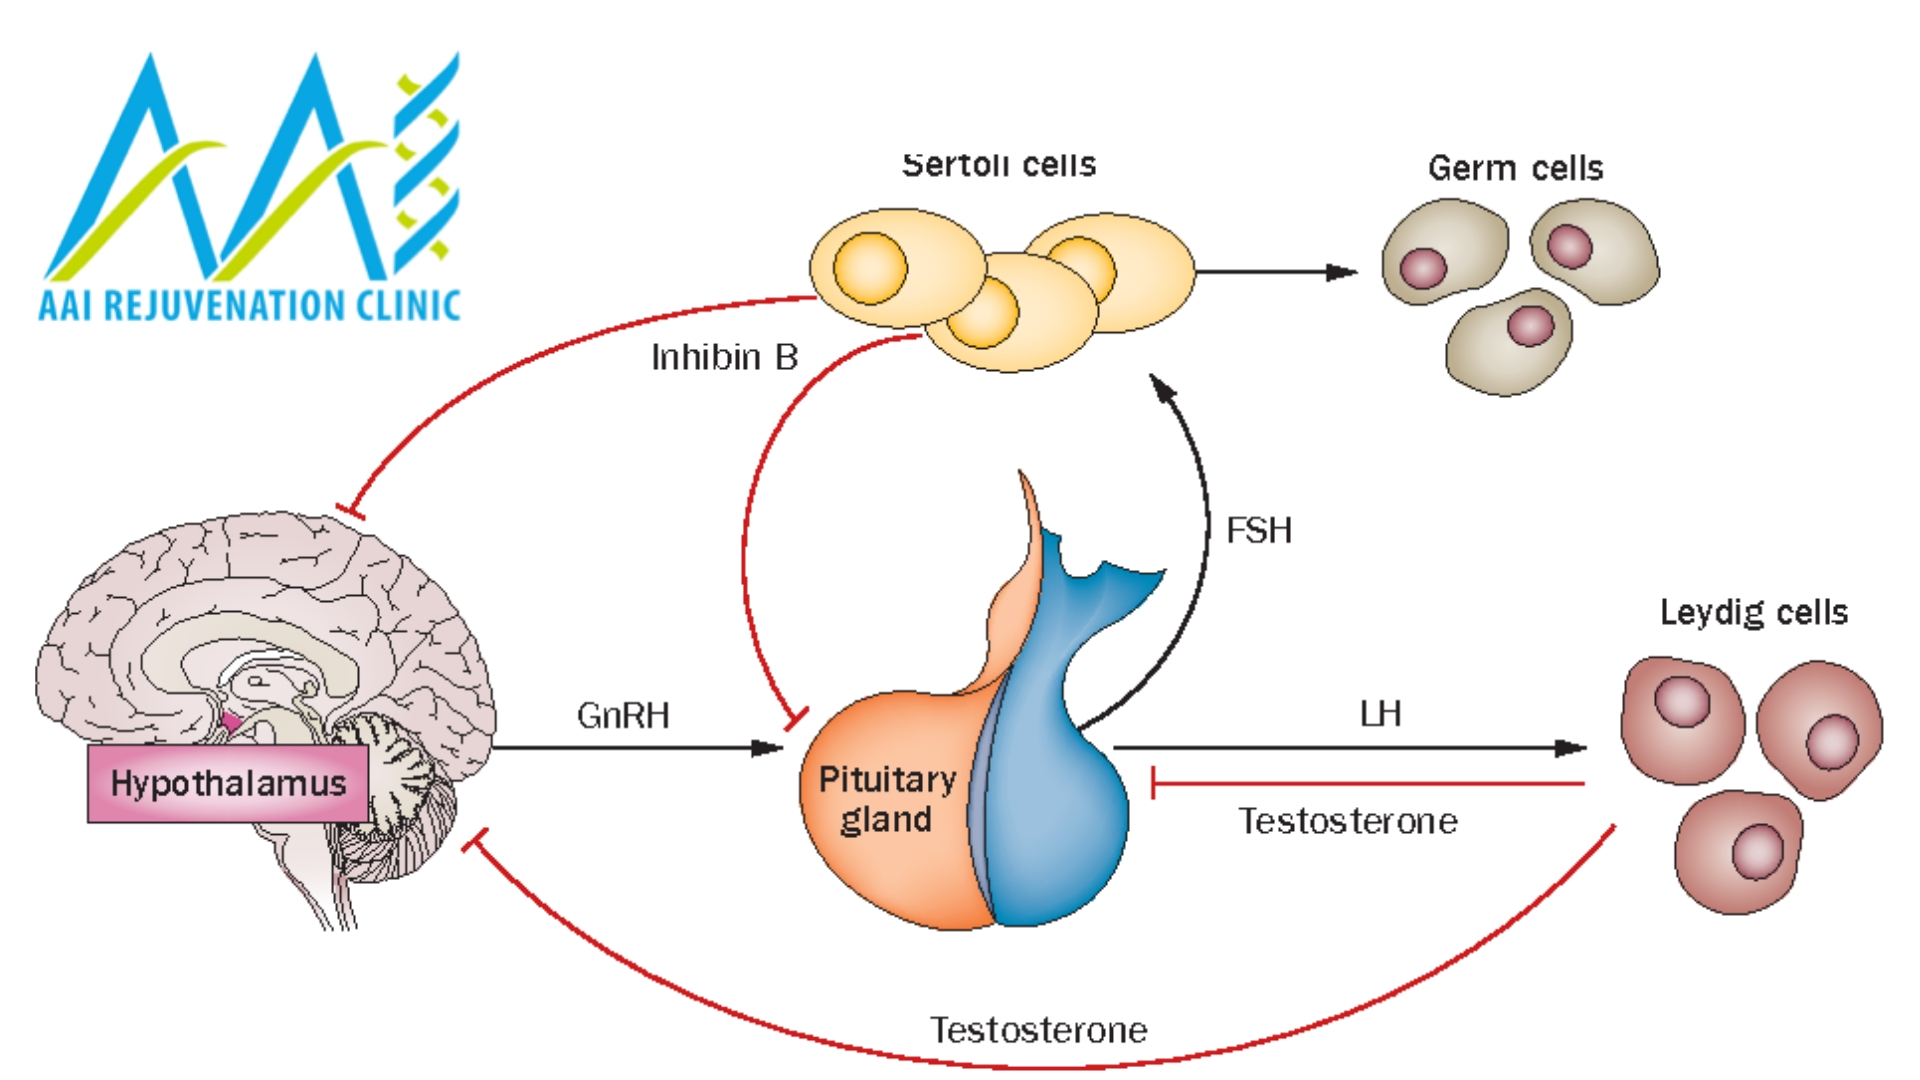 What is Follicle Stimulating Hormone (FSH)? 